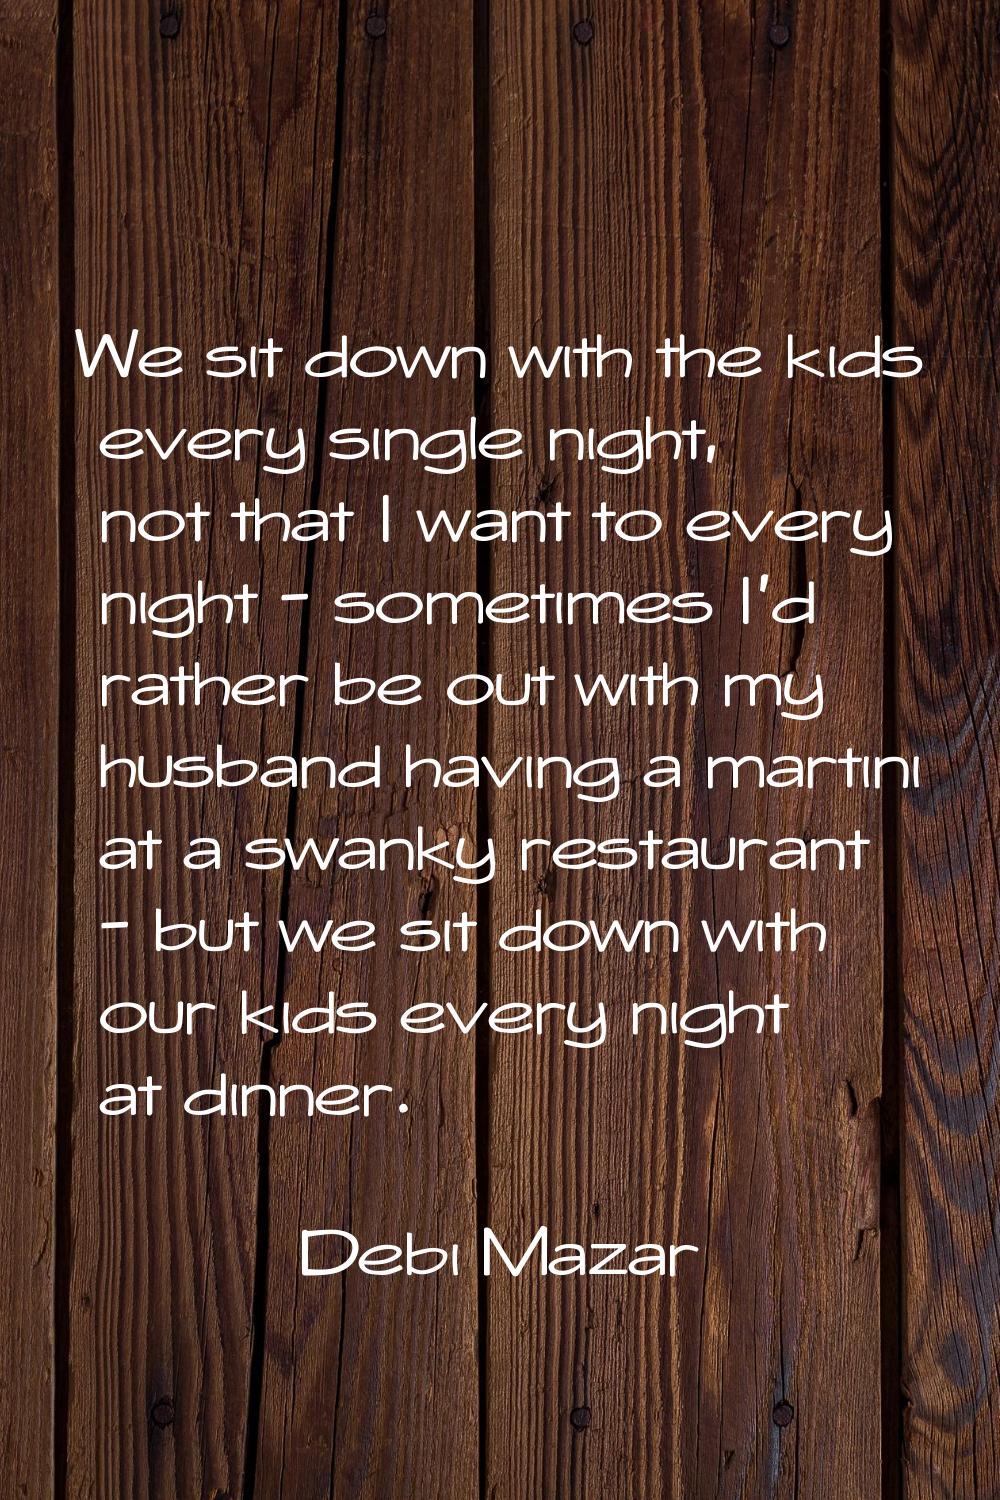 We sit down with the kids every single night, not that I want to every night - sometimes I'd rather